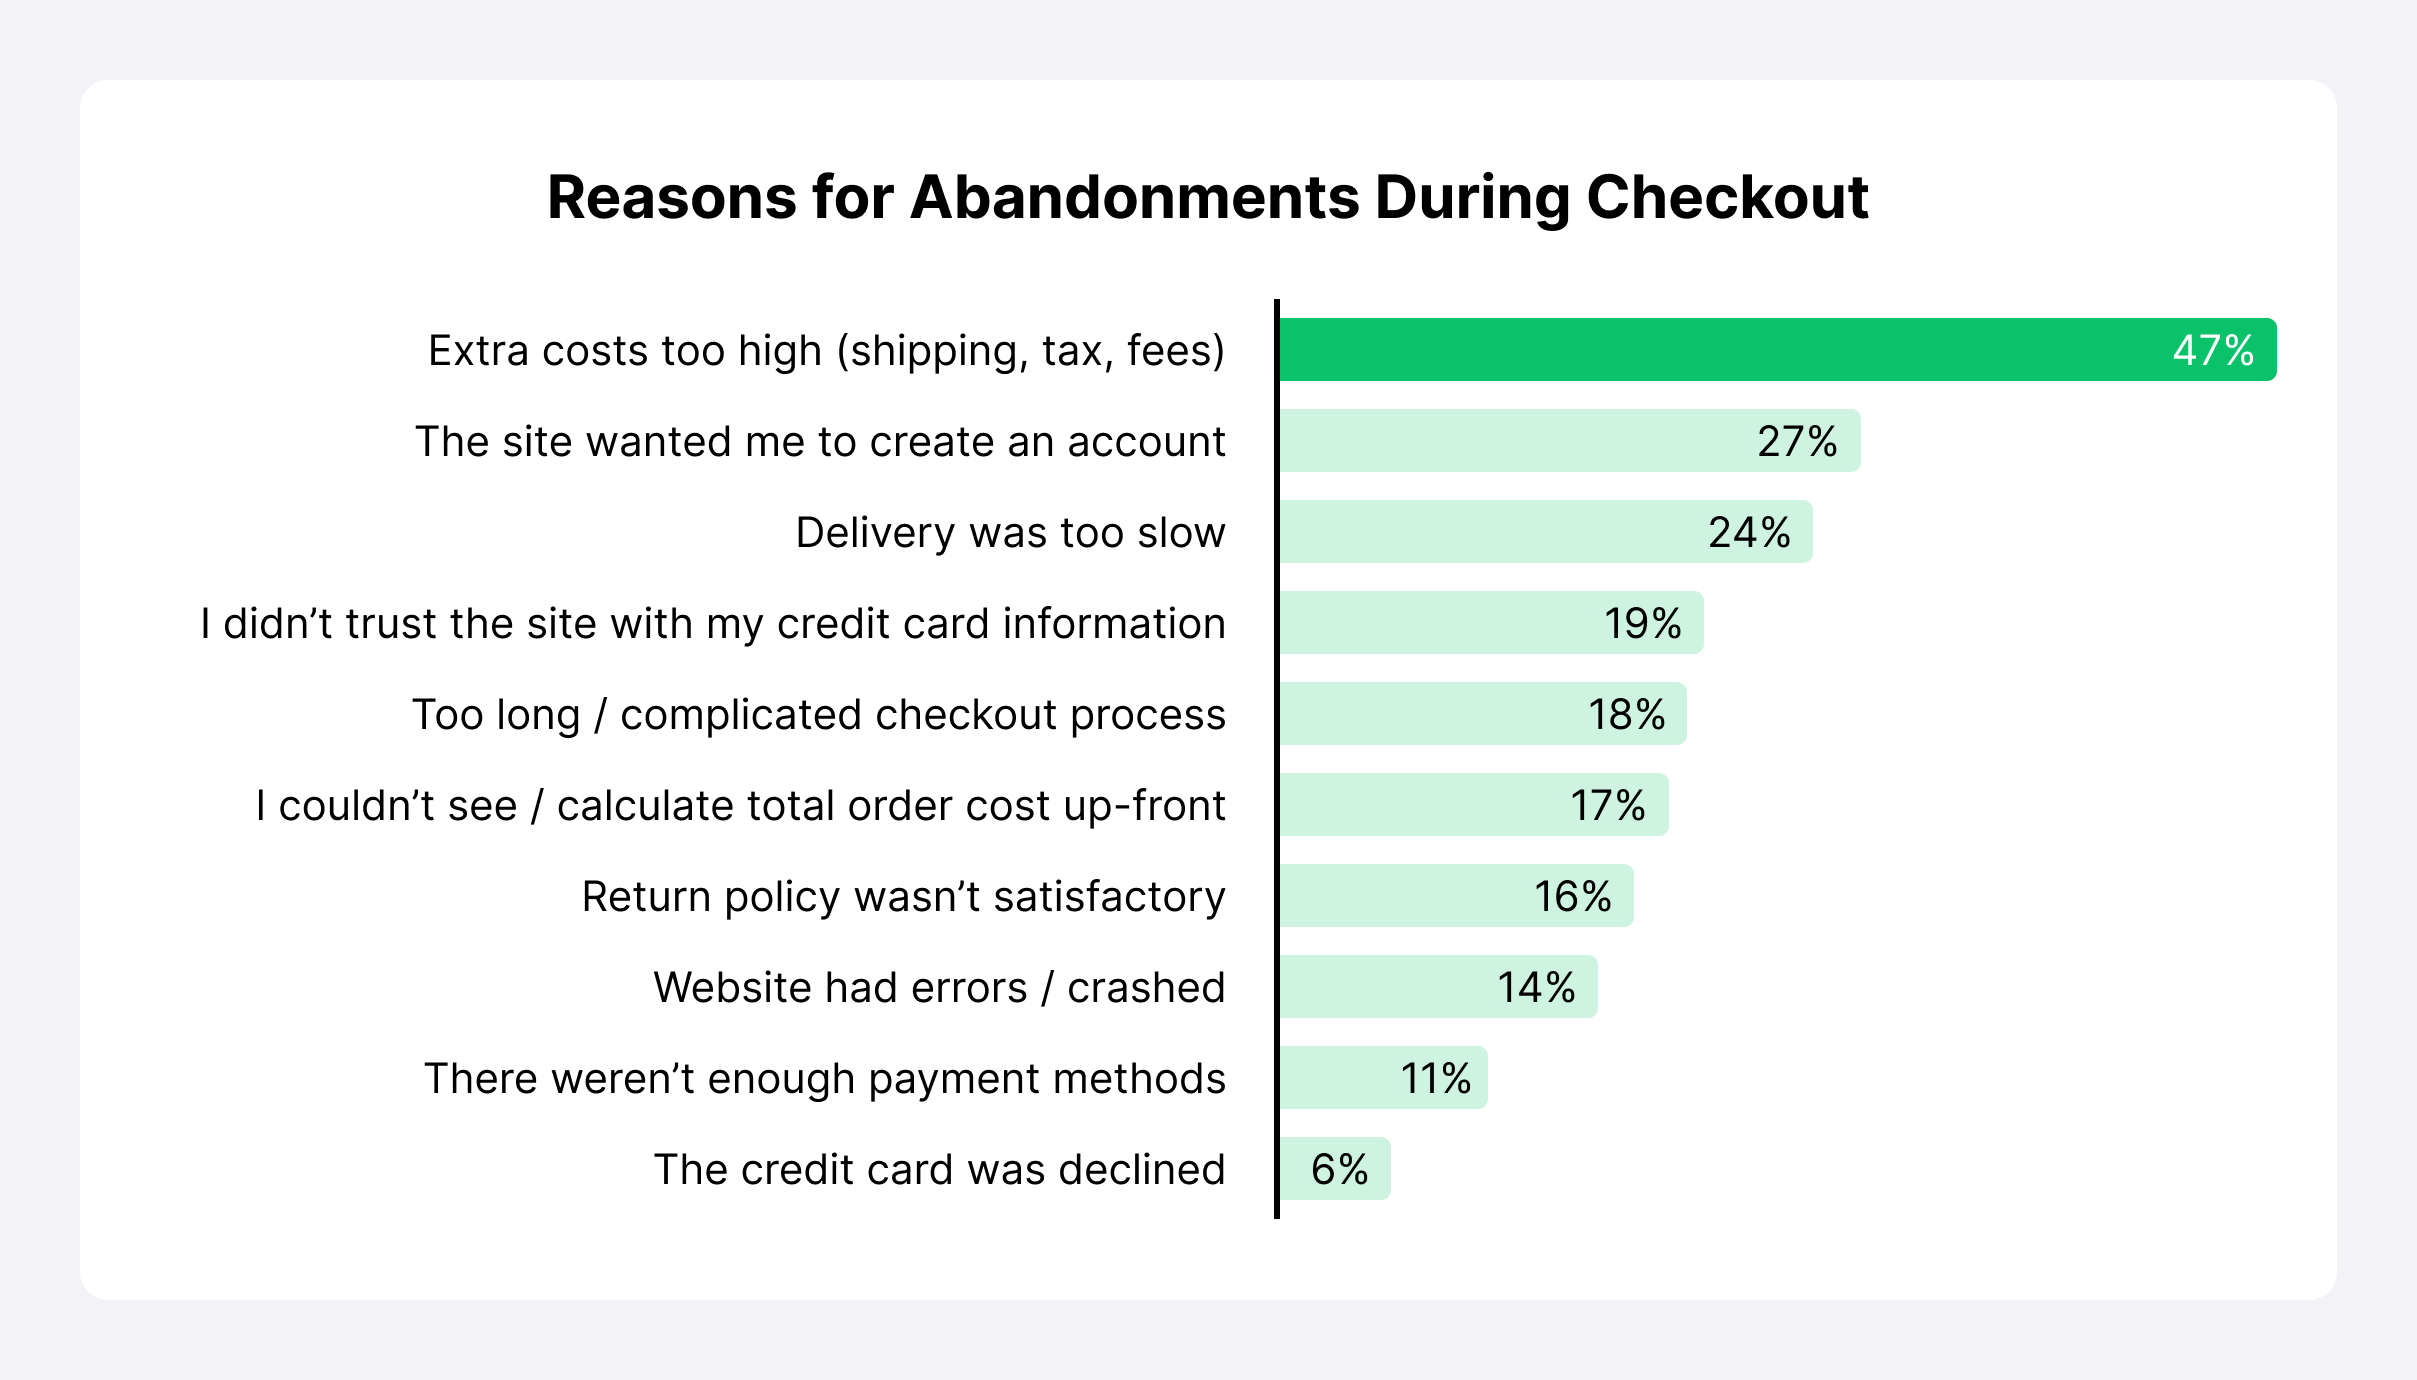 Reasons for Abandonments during checkout